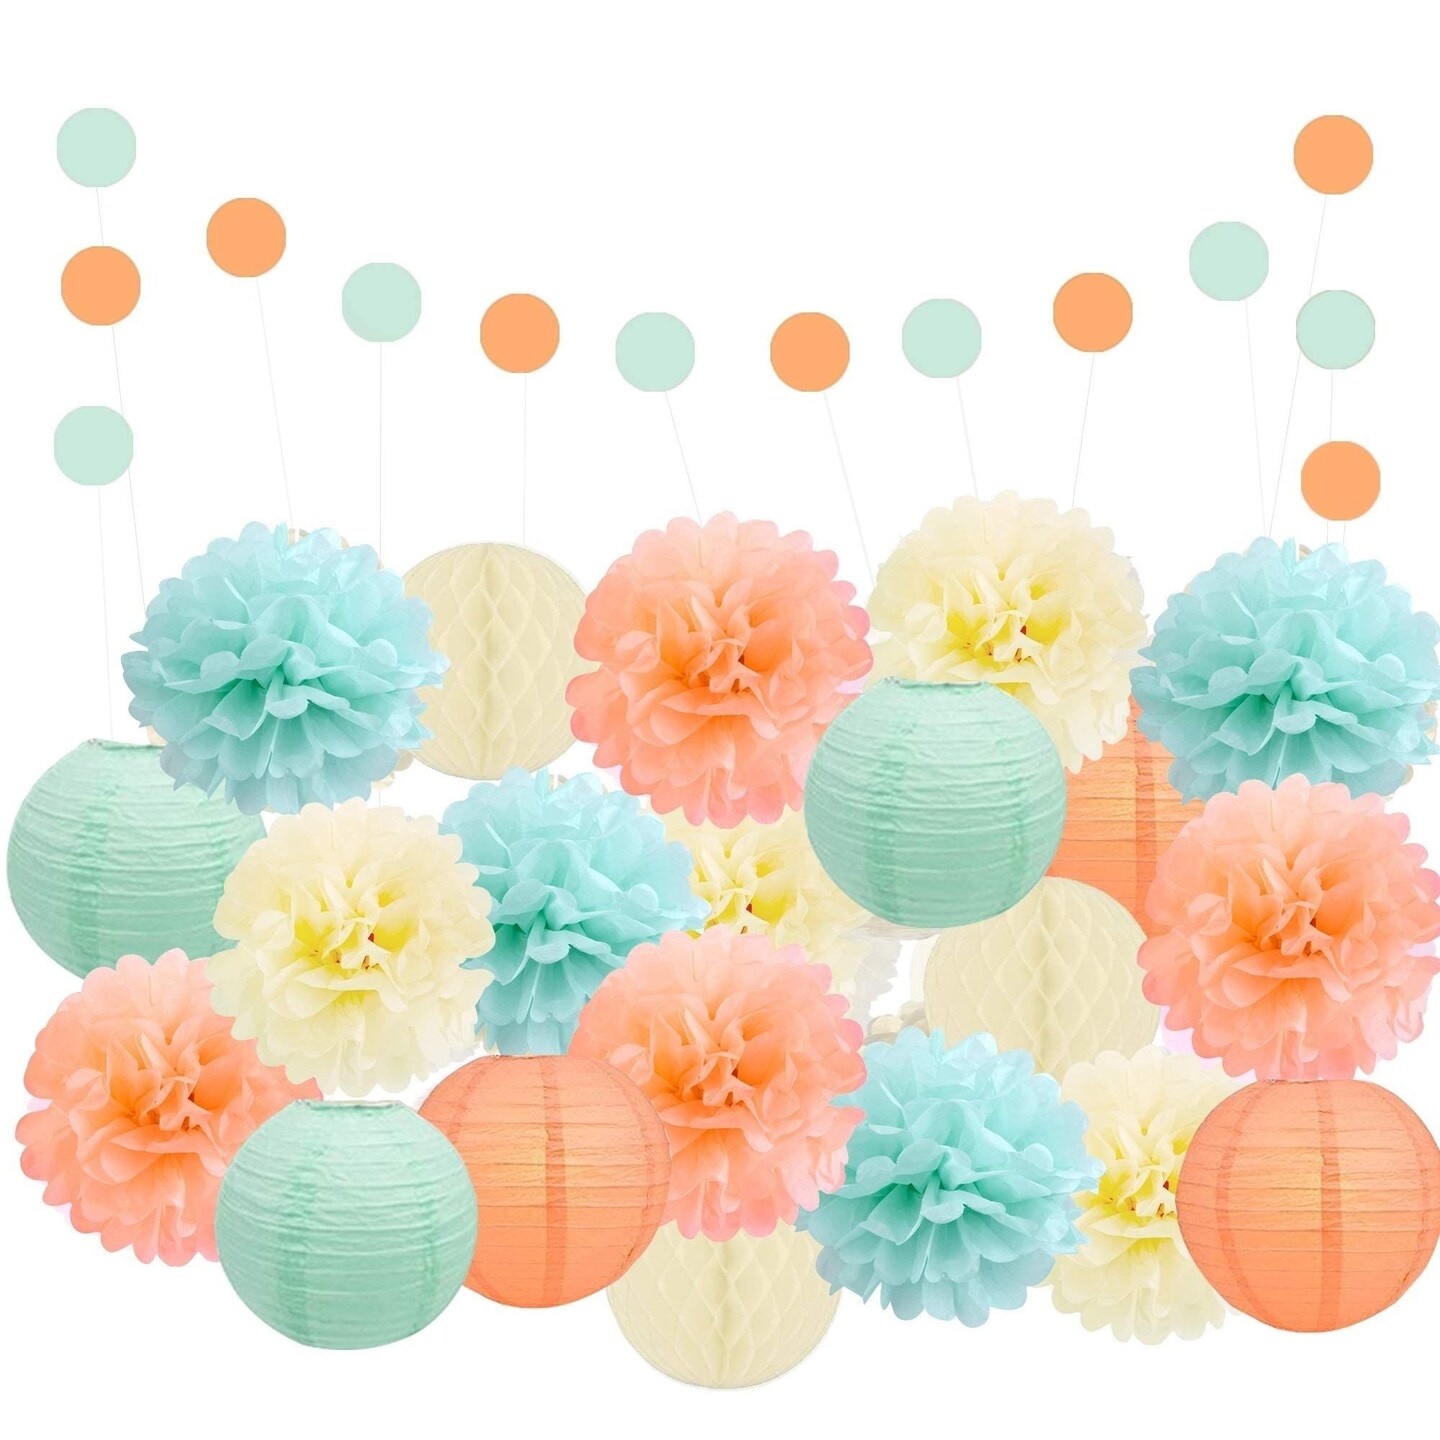 EpiqueOne Party Decoration Kit &#x2013; Mint, Peach and Ivory Decorative Party Supplies Set &#x2013; Reusable Party Decor &#x2013; Ideal for Birthday, Baby Shower, Anniversary, Wedding, Bridal Shower